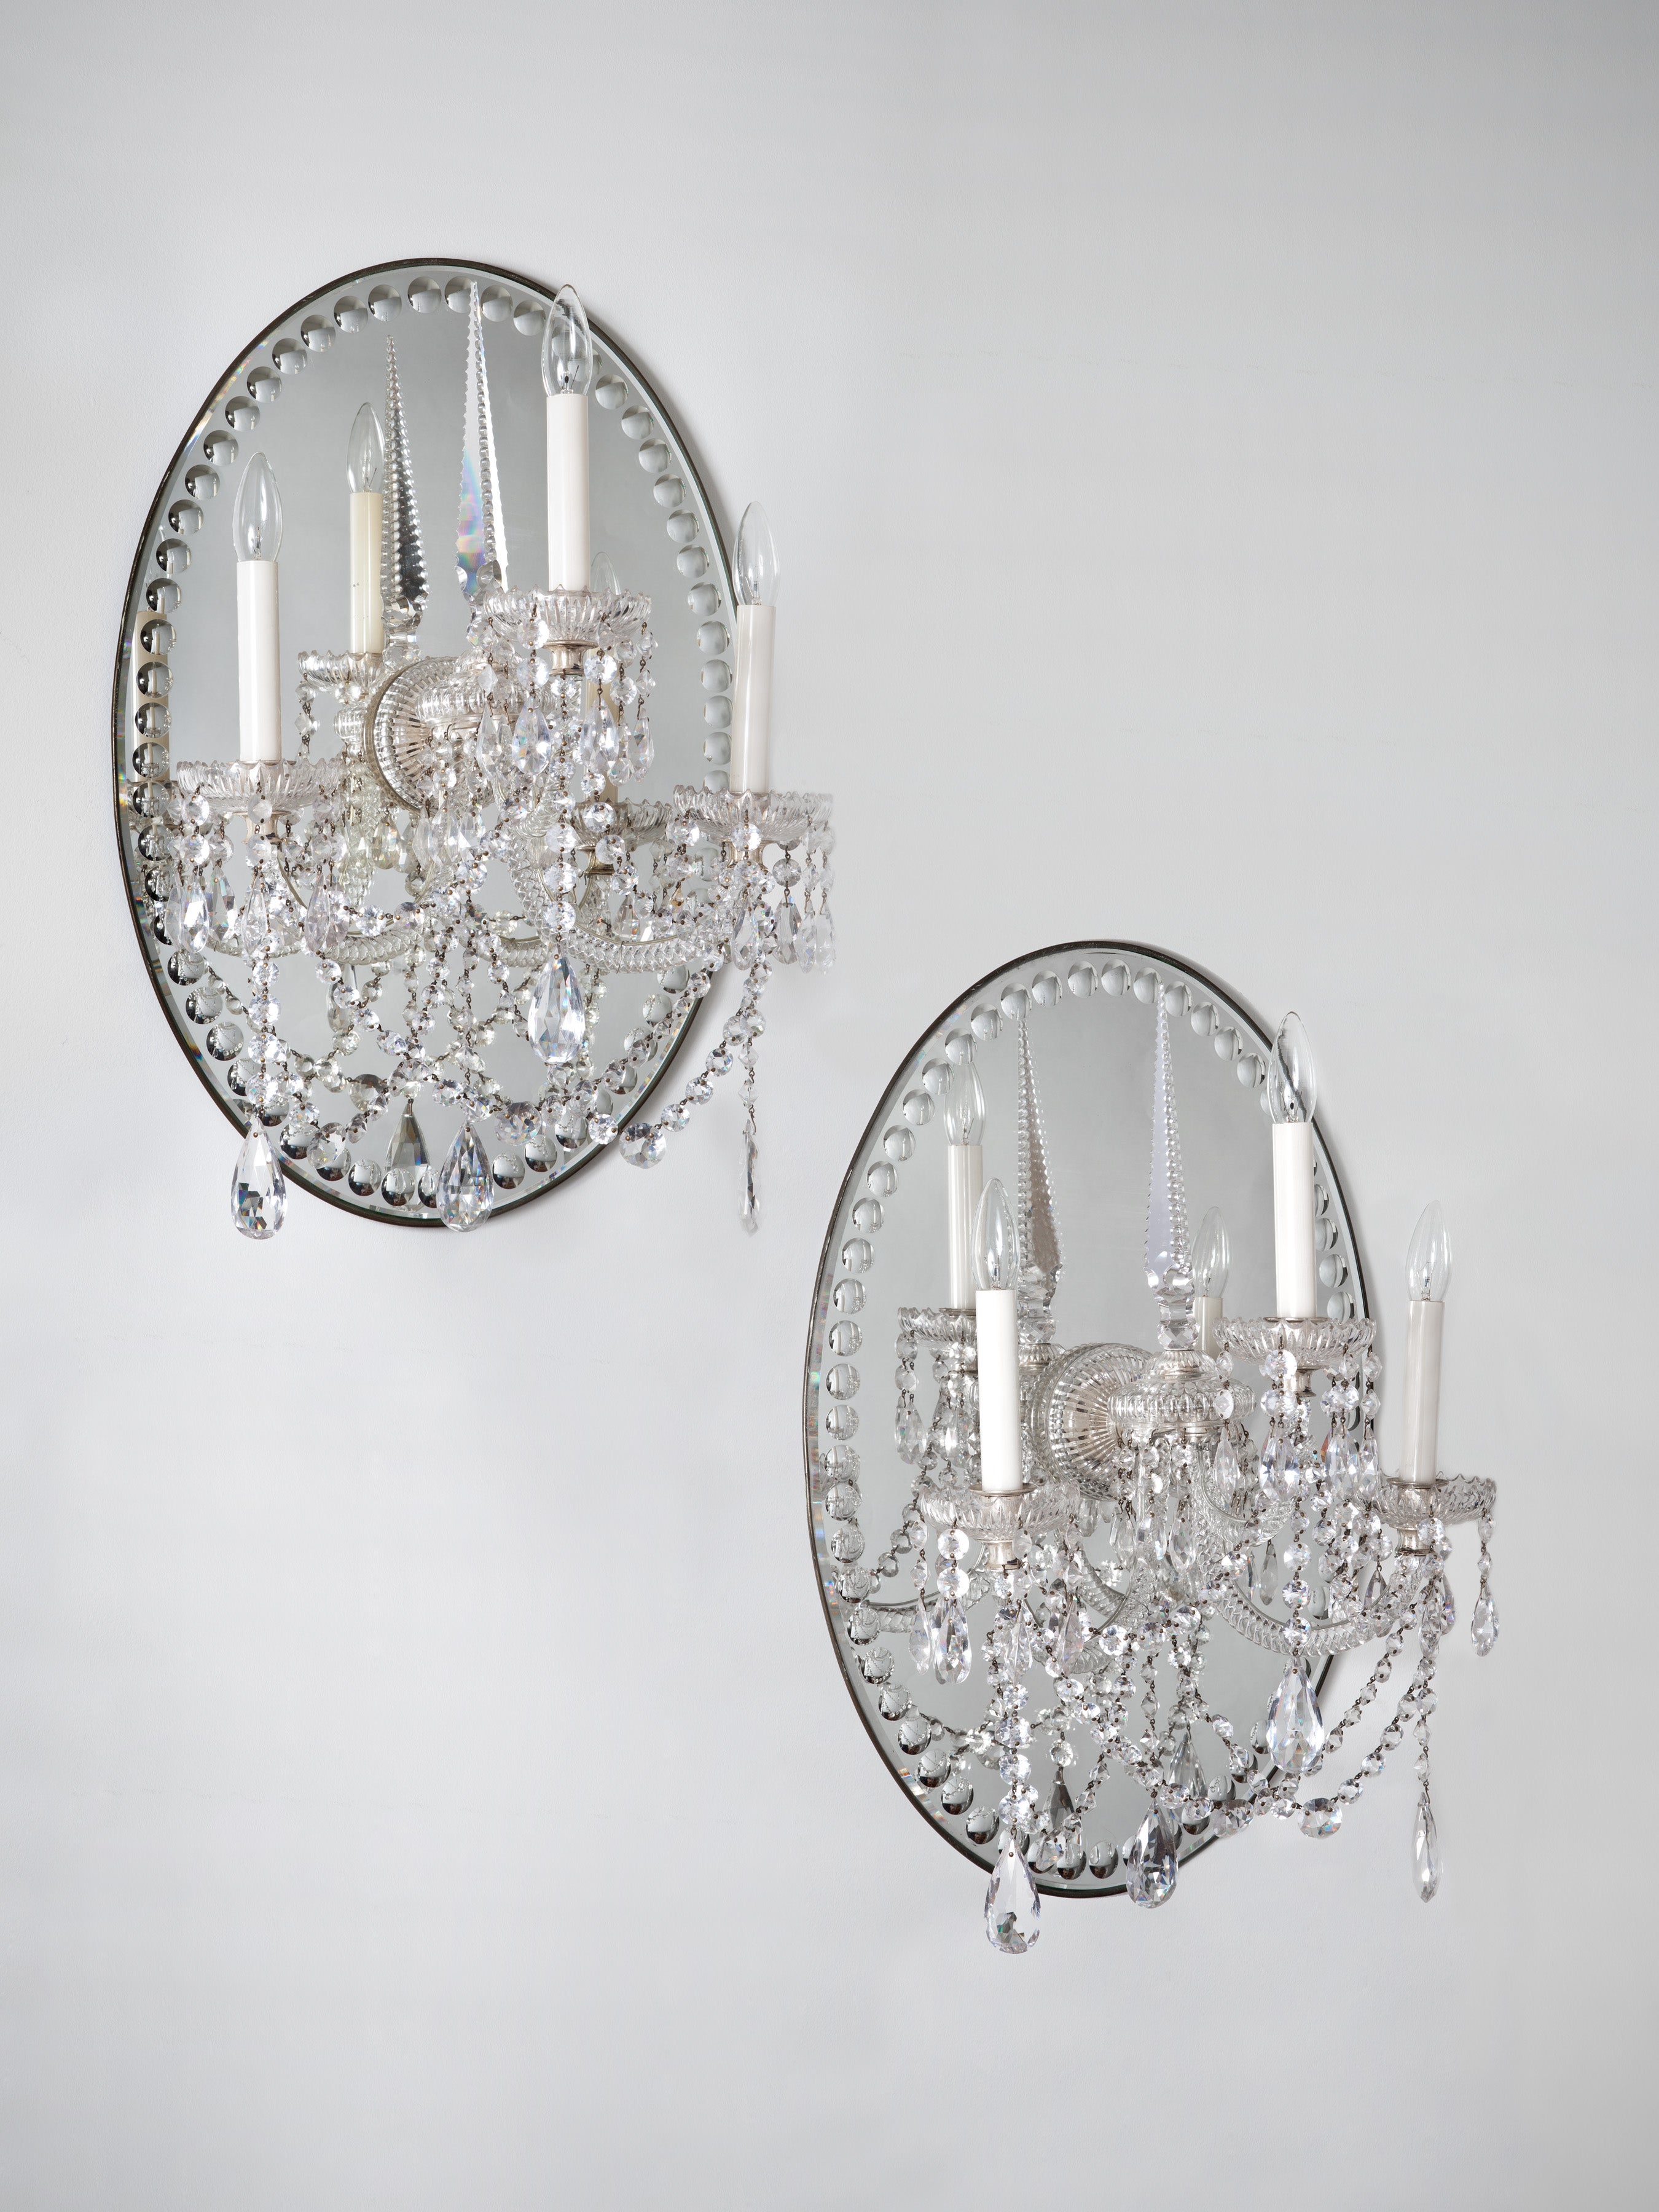 A Pair of Glass Wall Lights